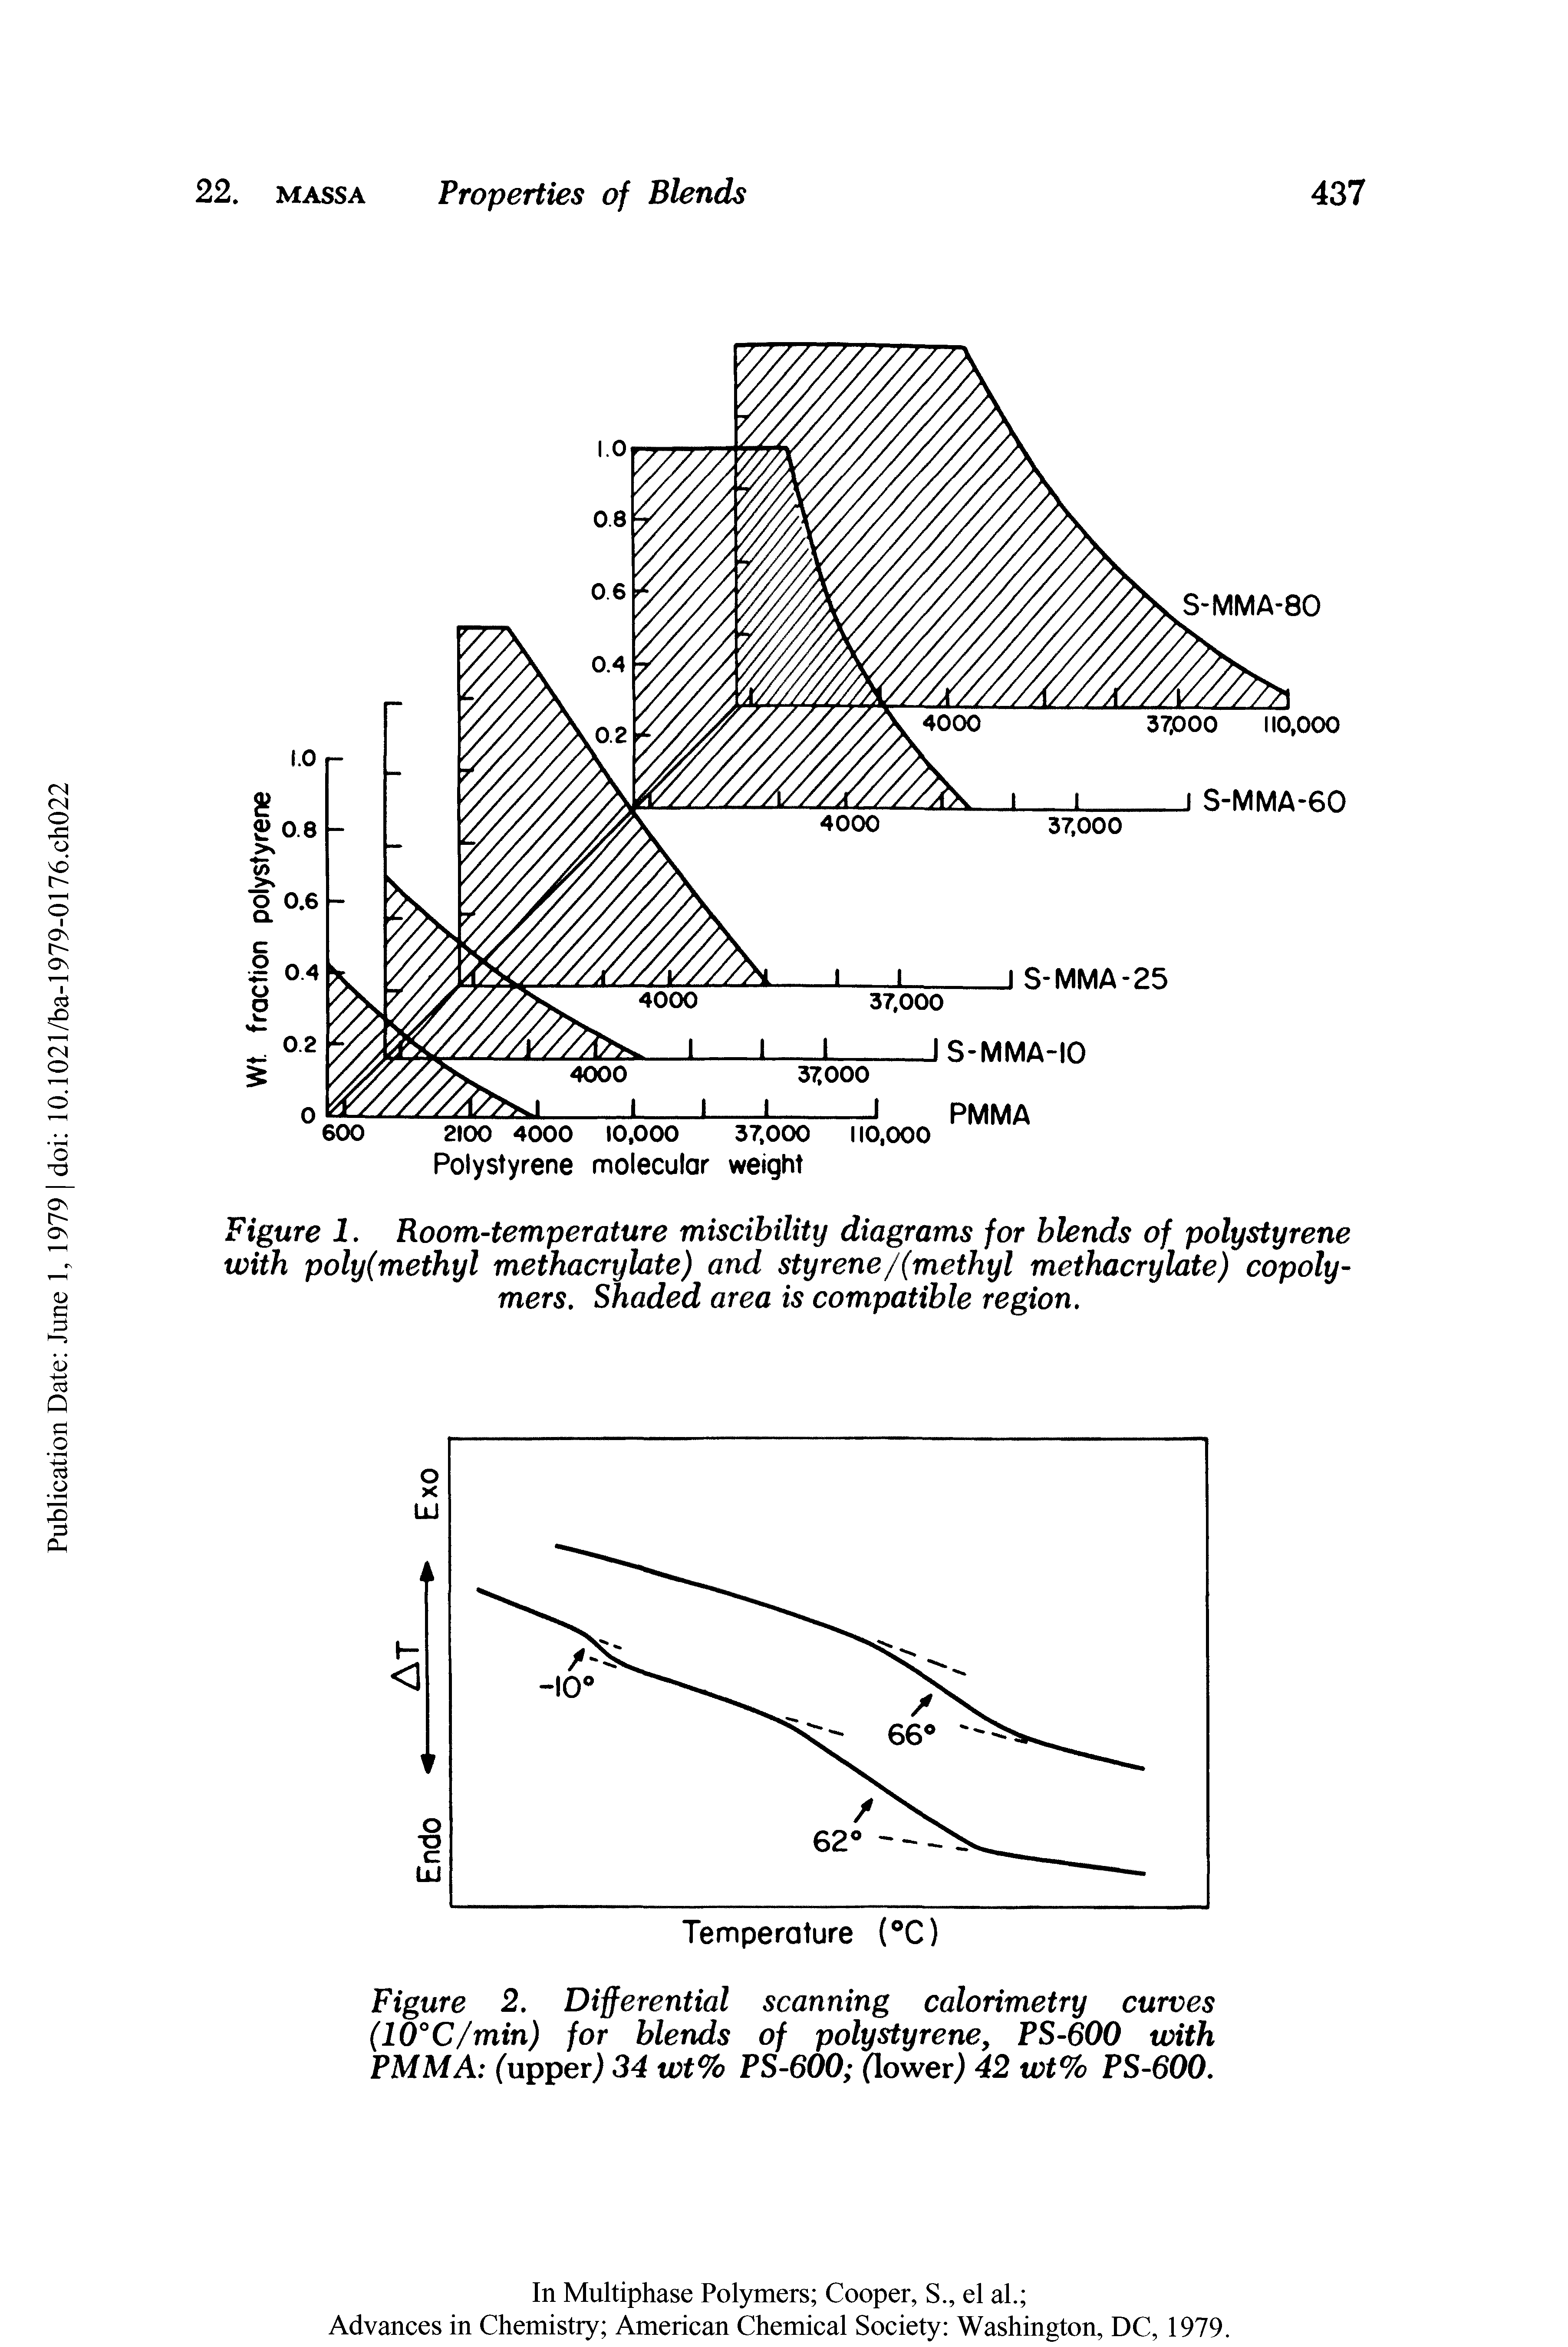 Figure 2. Differential scanning calorimetry curves (10°C/min) for blends of polystyrene, PS-600 with PMMA (upper) 34 wt% PS-600 (lower) 42 wt% PS-600.